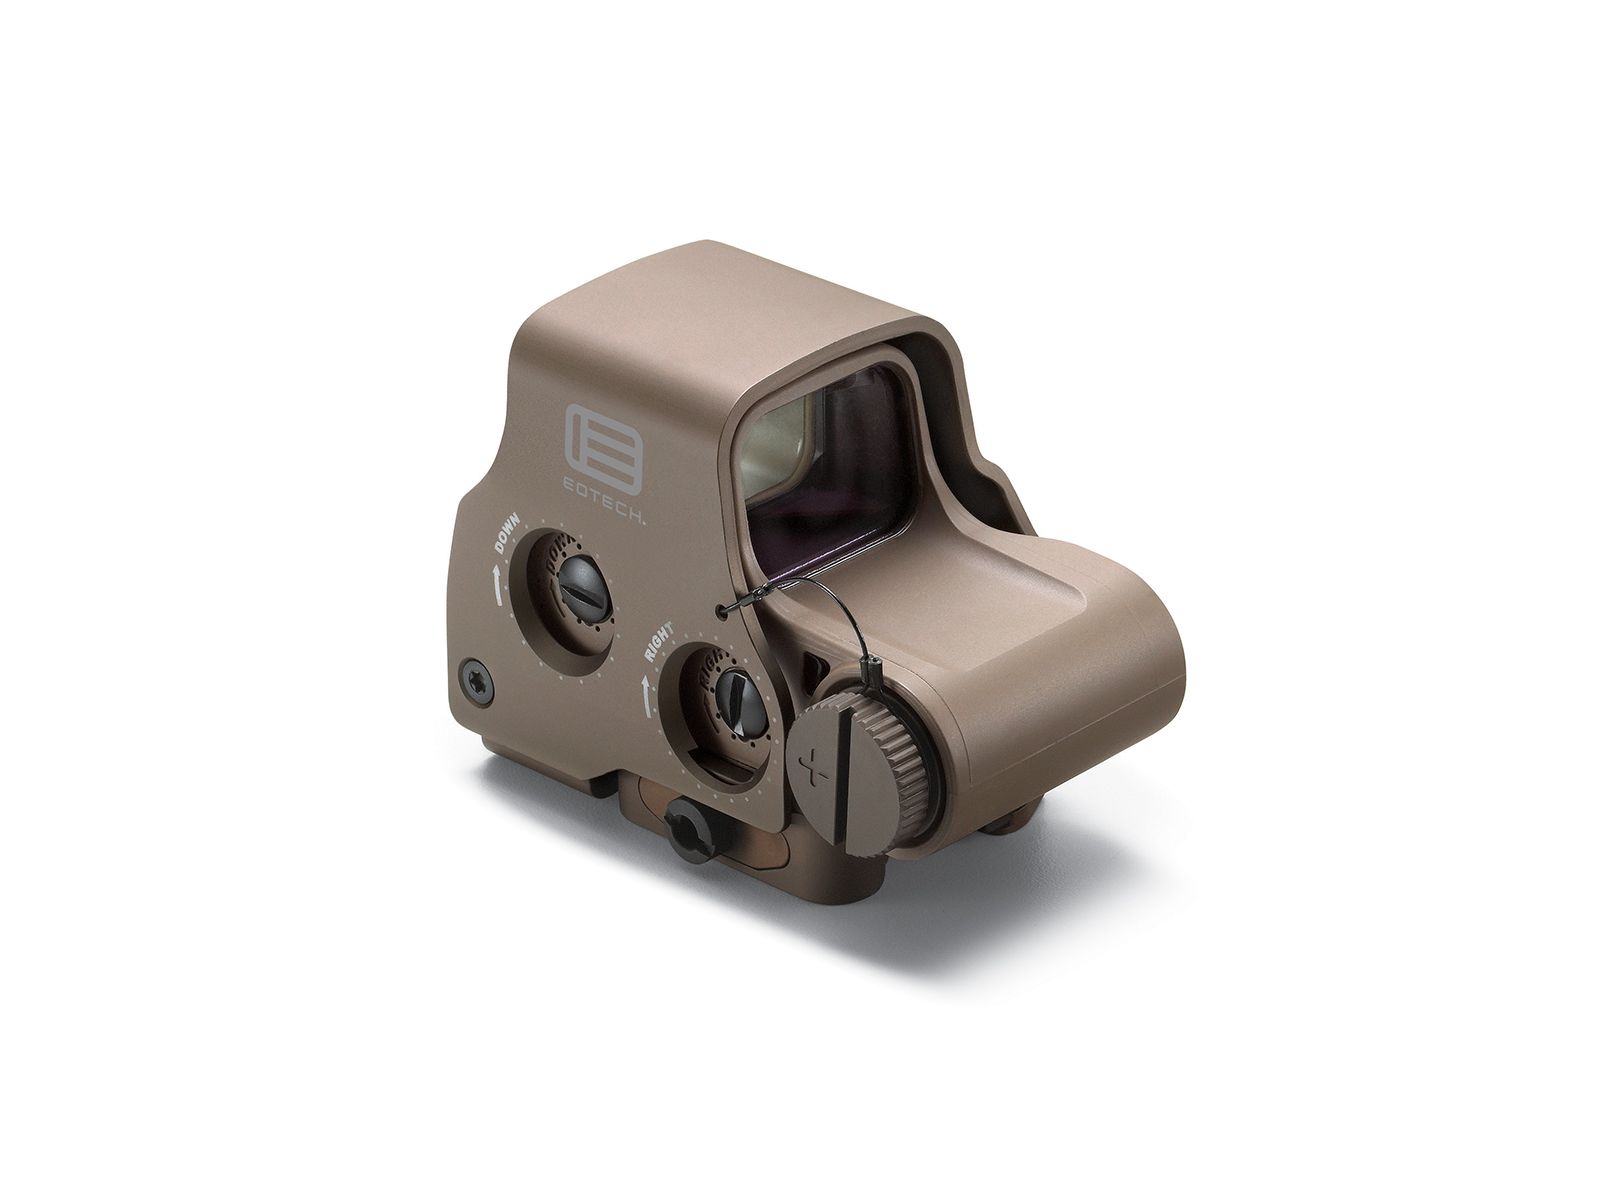 AIRSOFT97 沖縄本店 通販部 / 【実物】EoTech EXPS3-0 TAN ホロサイト